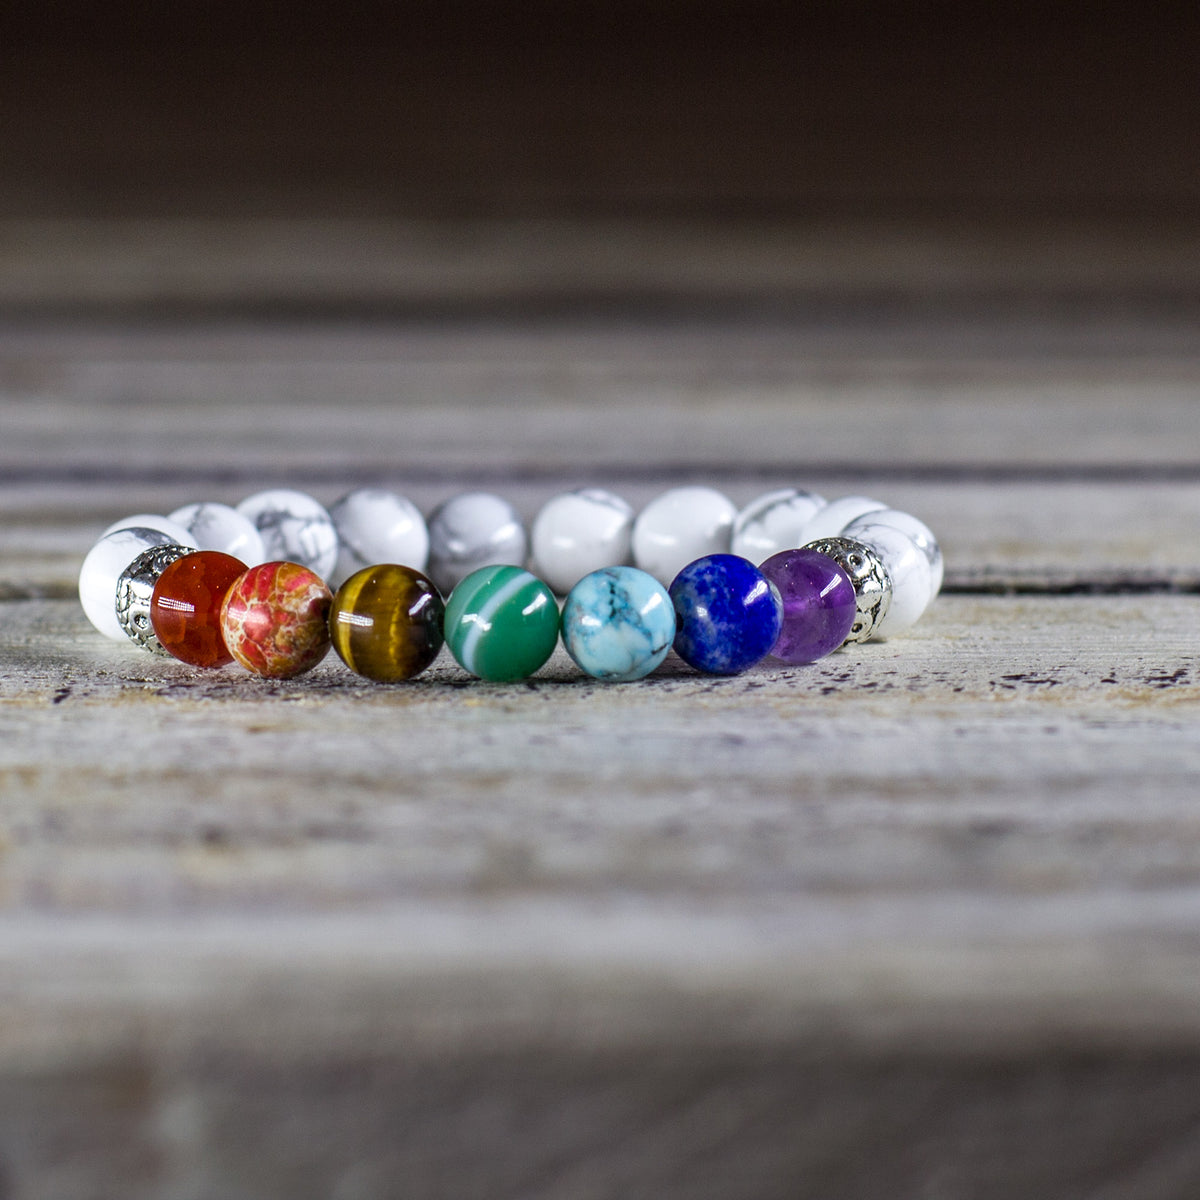 Seven Chakra Bracelet with White Agate Beads